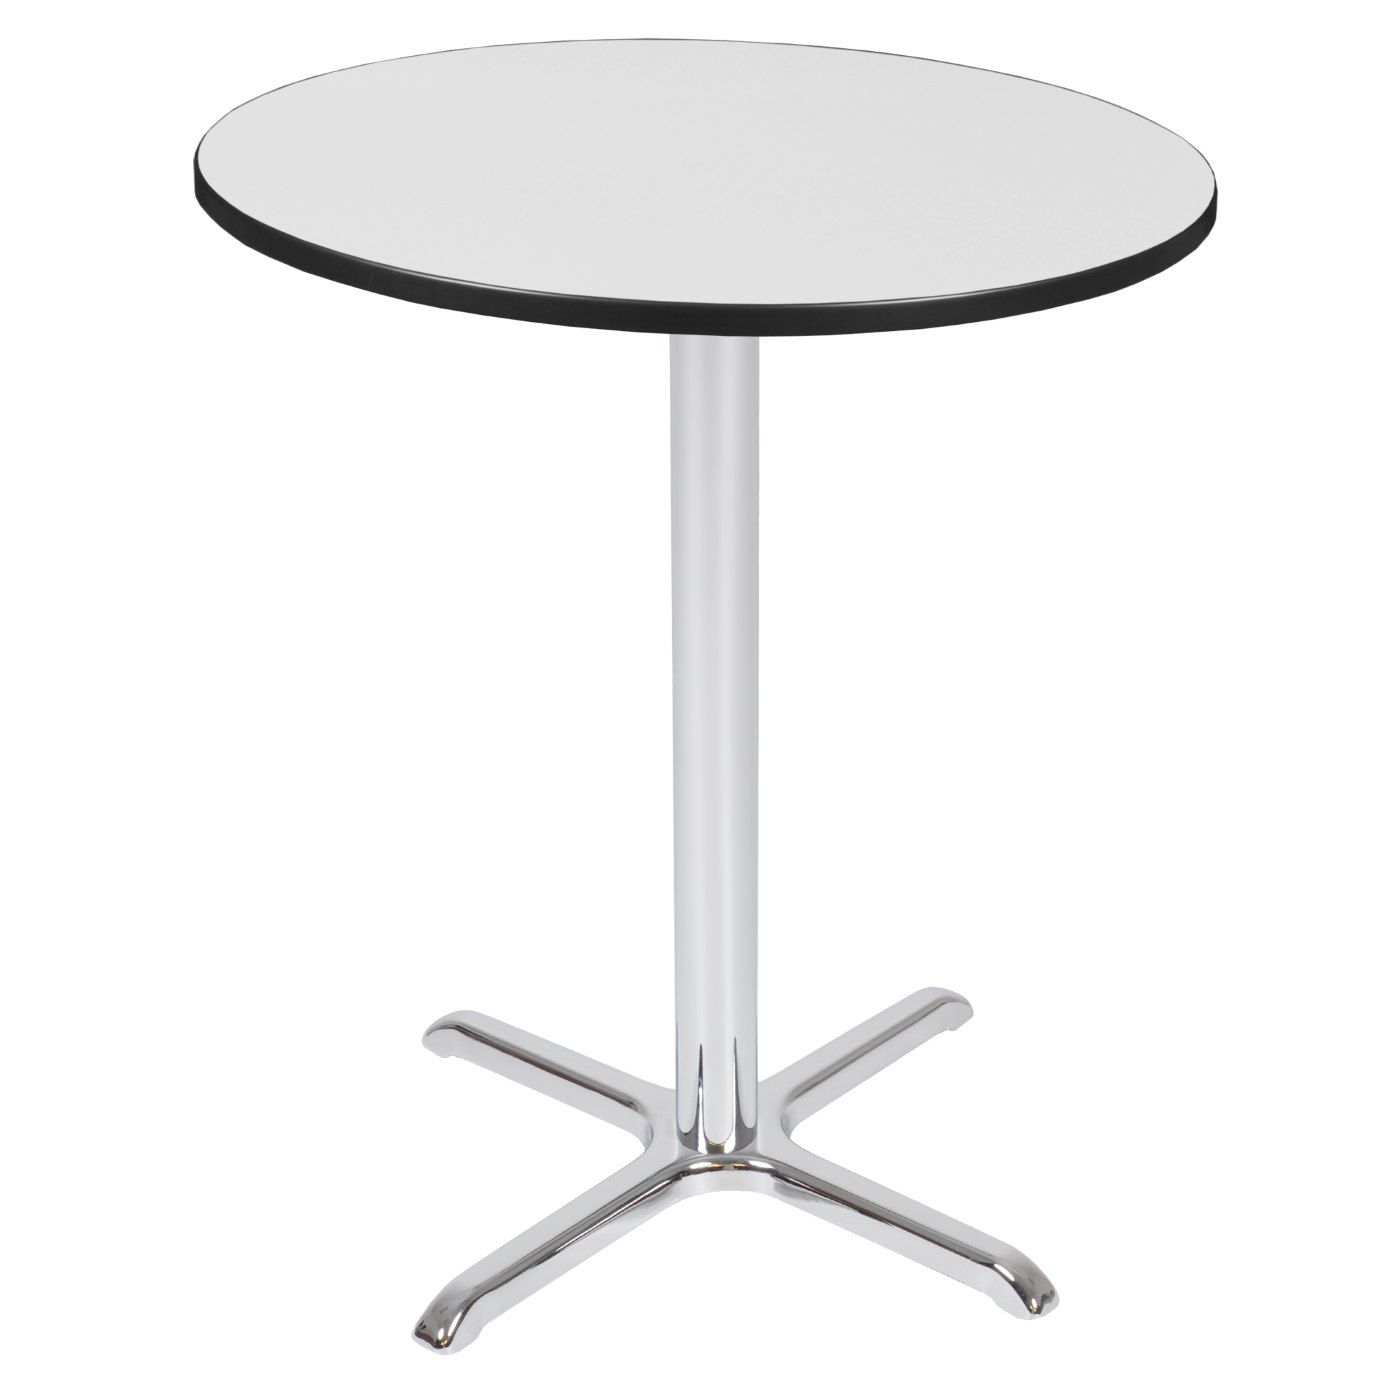 Tcb36rndwhcm | Regency Cain Cafe High 36" Round X Base Table  White Pertaining To Regency Cain Steel Coffee Tables (Gallery 3 of 21)